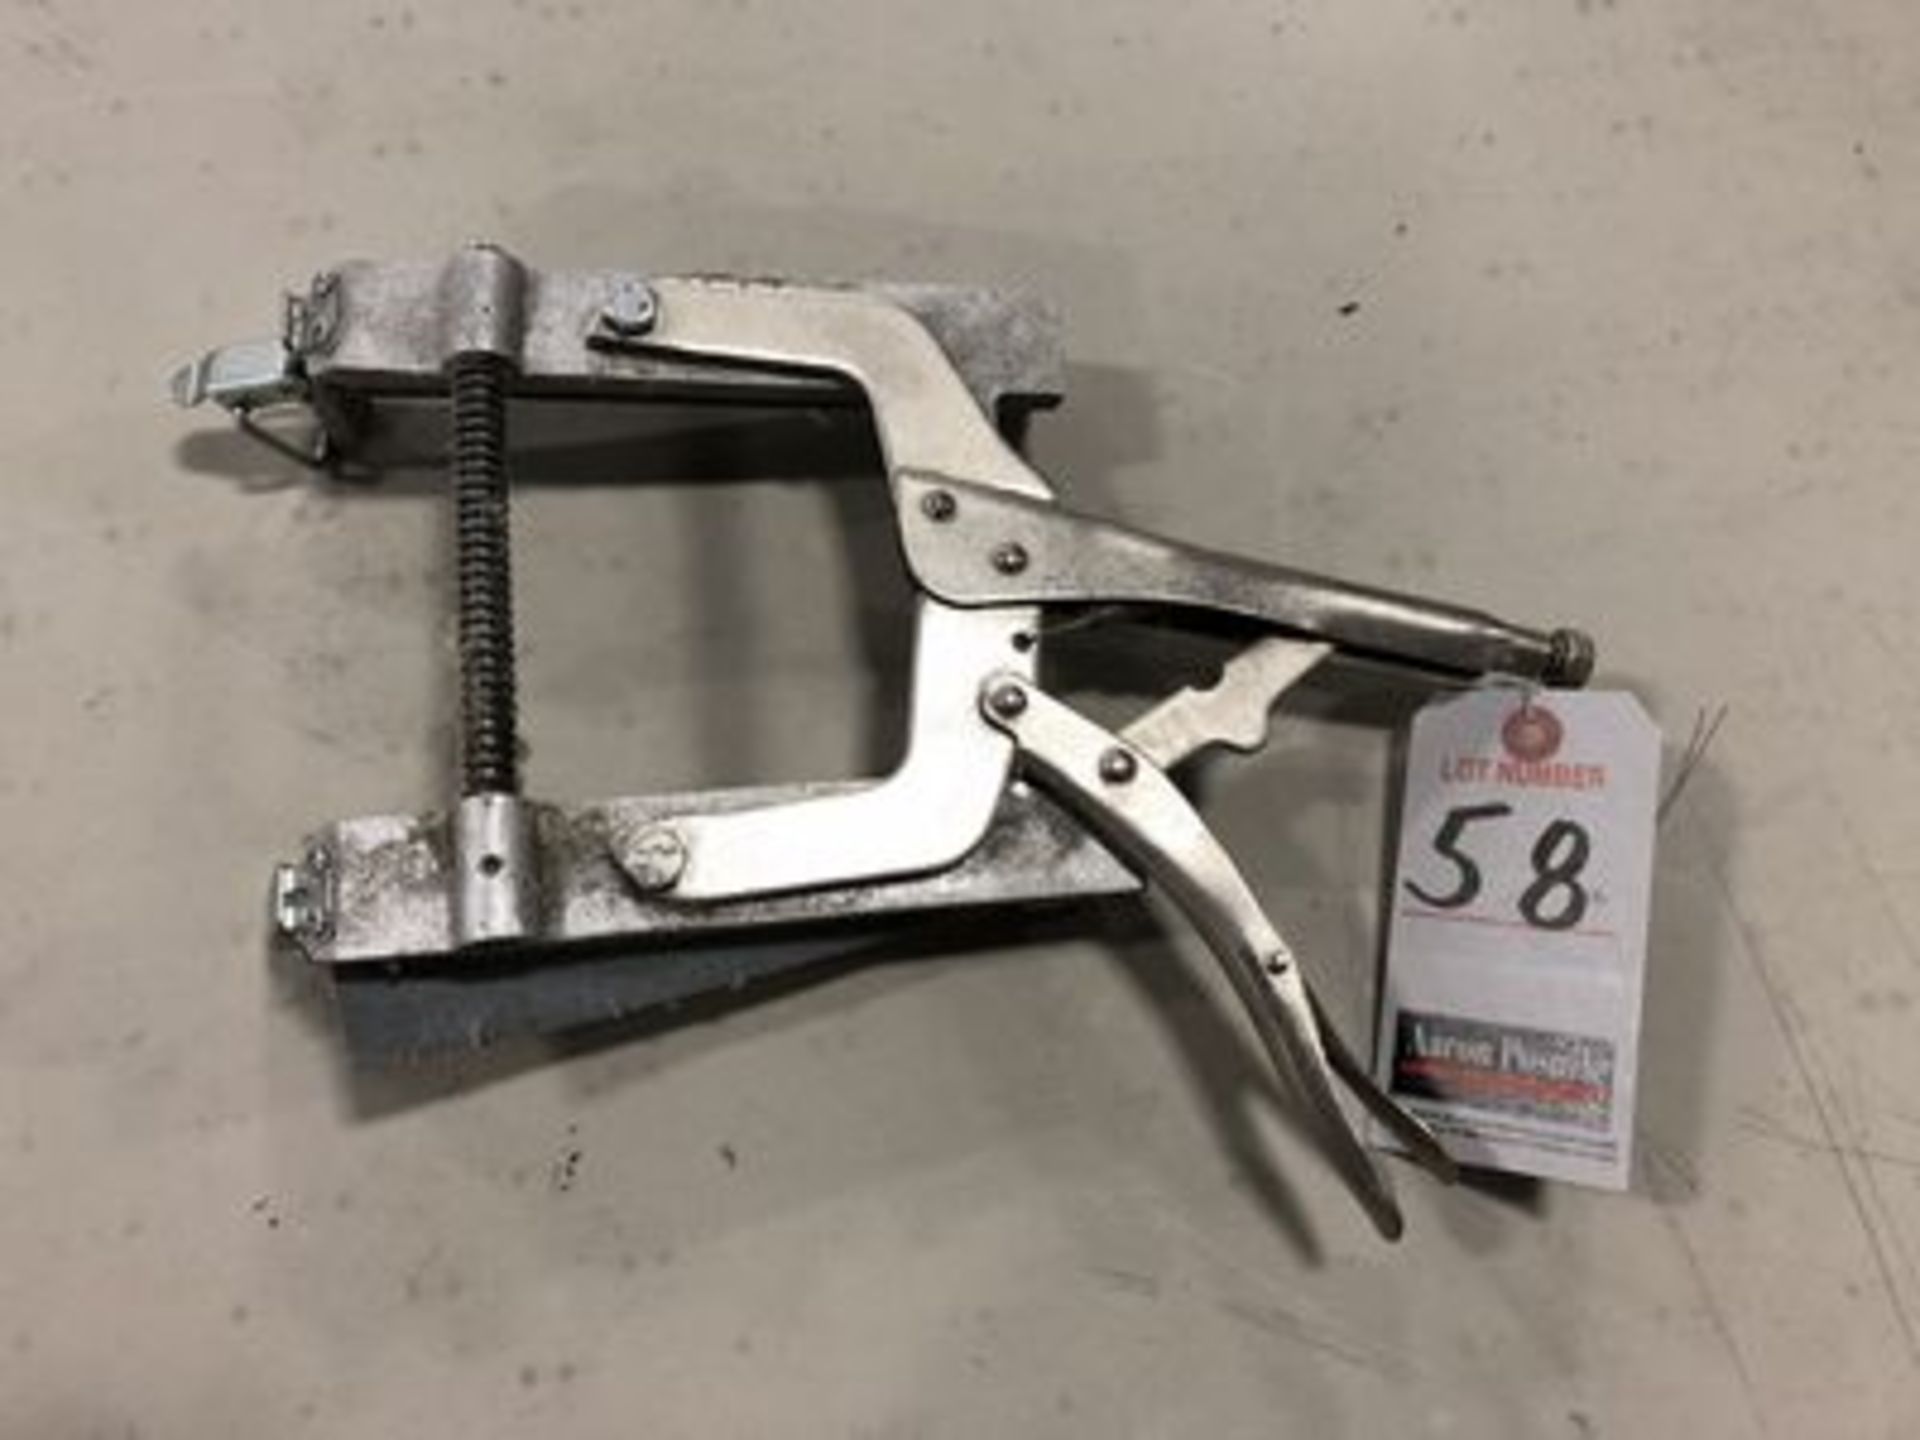 ASS'T SPRING VICE-GRIP WRENCHES